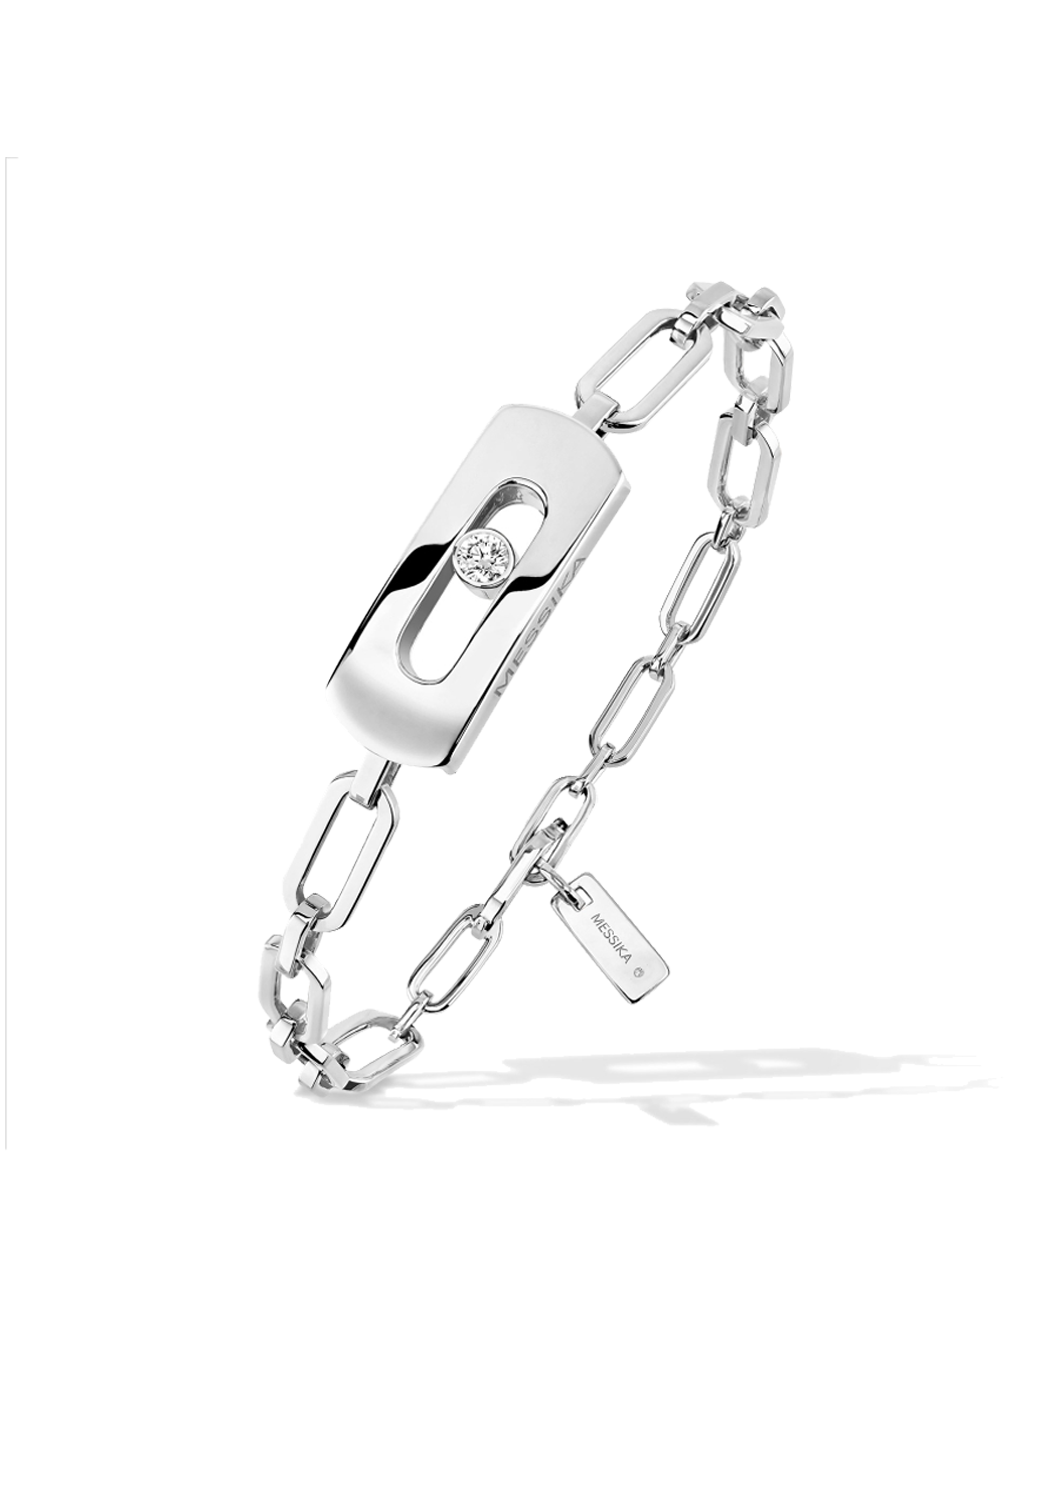 Messika My Move 18K White Gold Interchangeable Chain Bracelet | Ref. 12387 | OsterJewelers.com